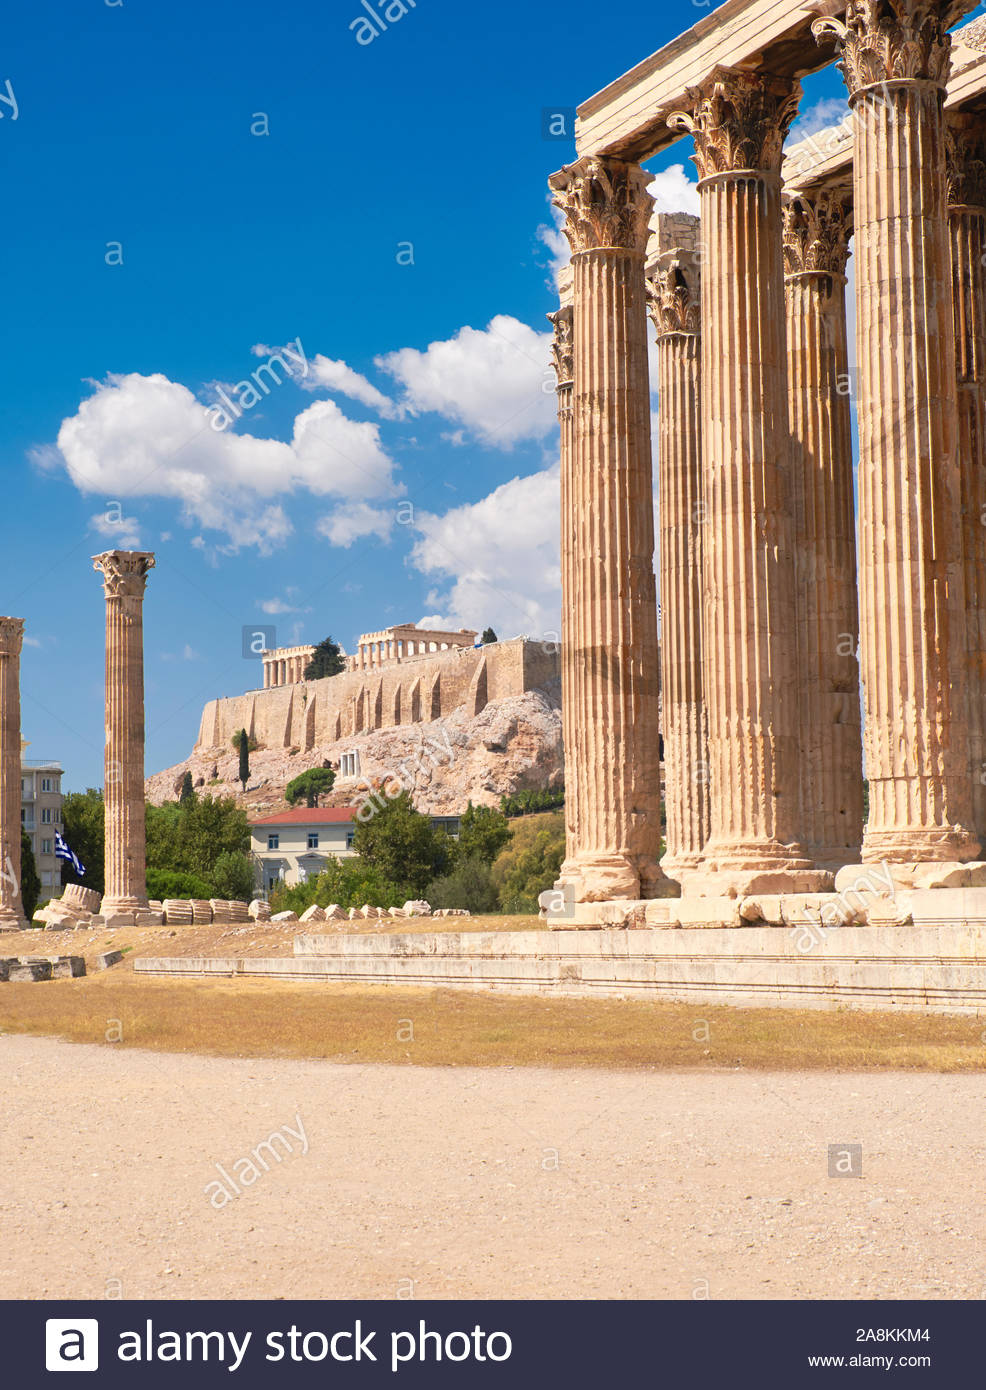 Temple Of Zeus With Acropolis On The Background In Athens Greece